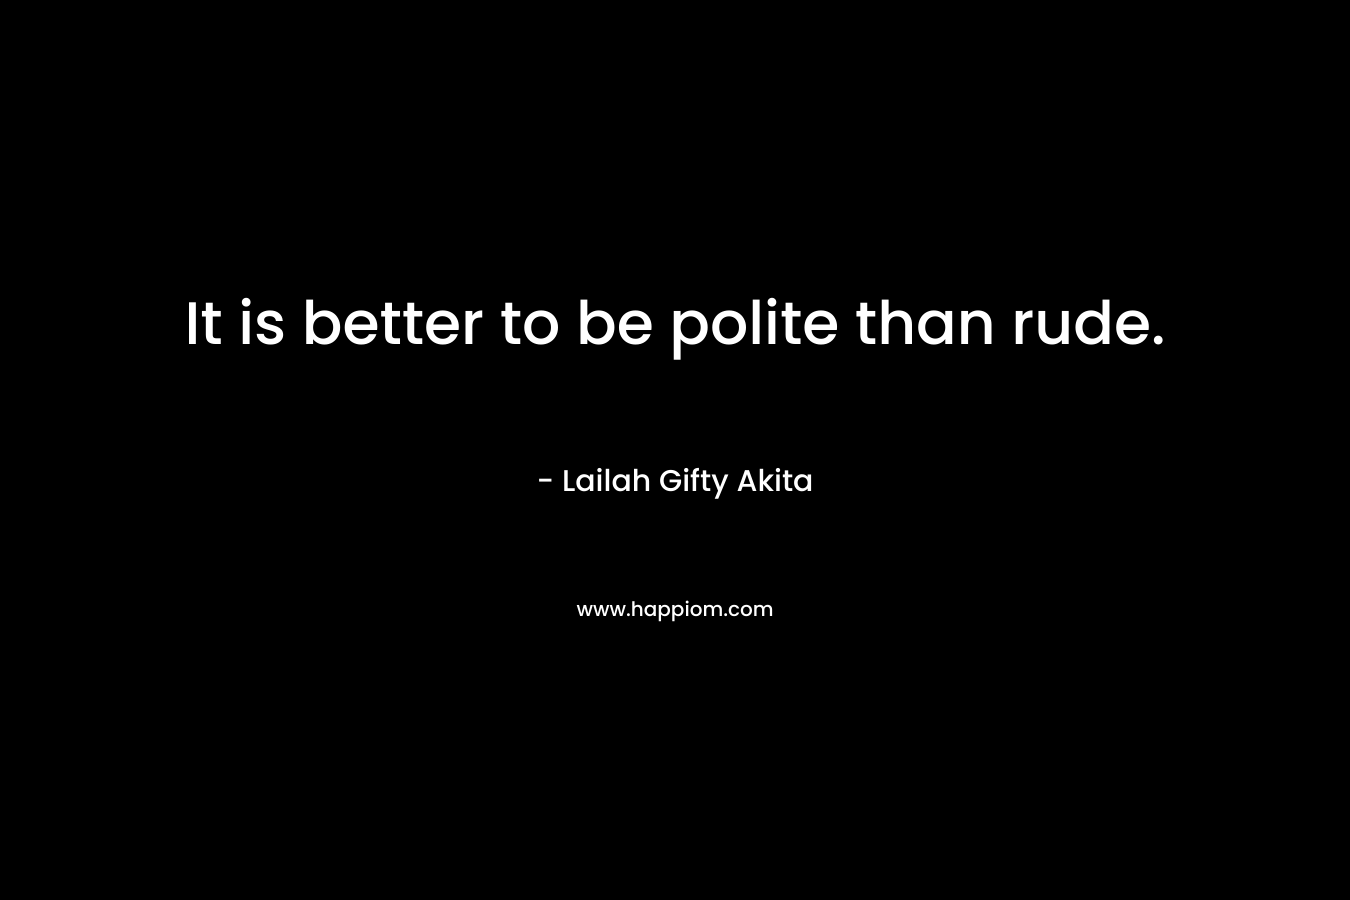 It is better to be polite than rude.